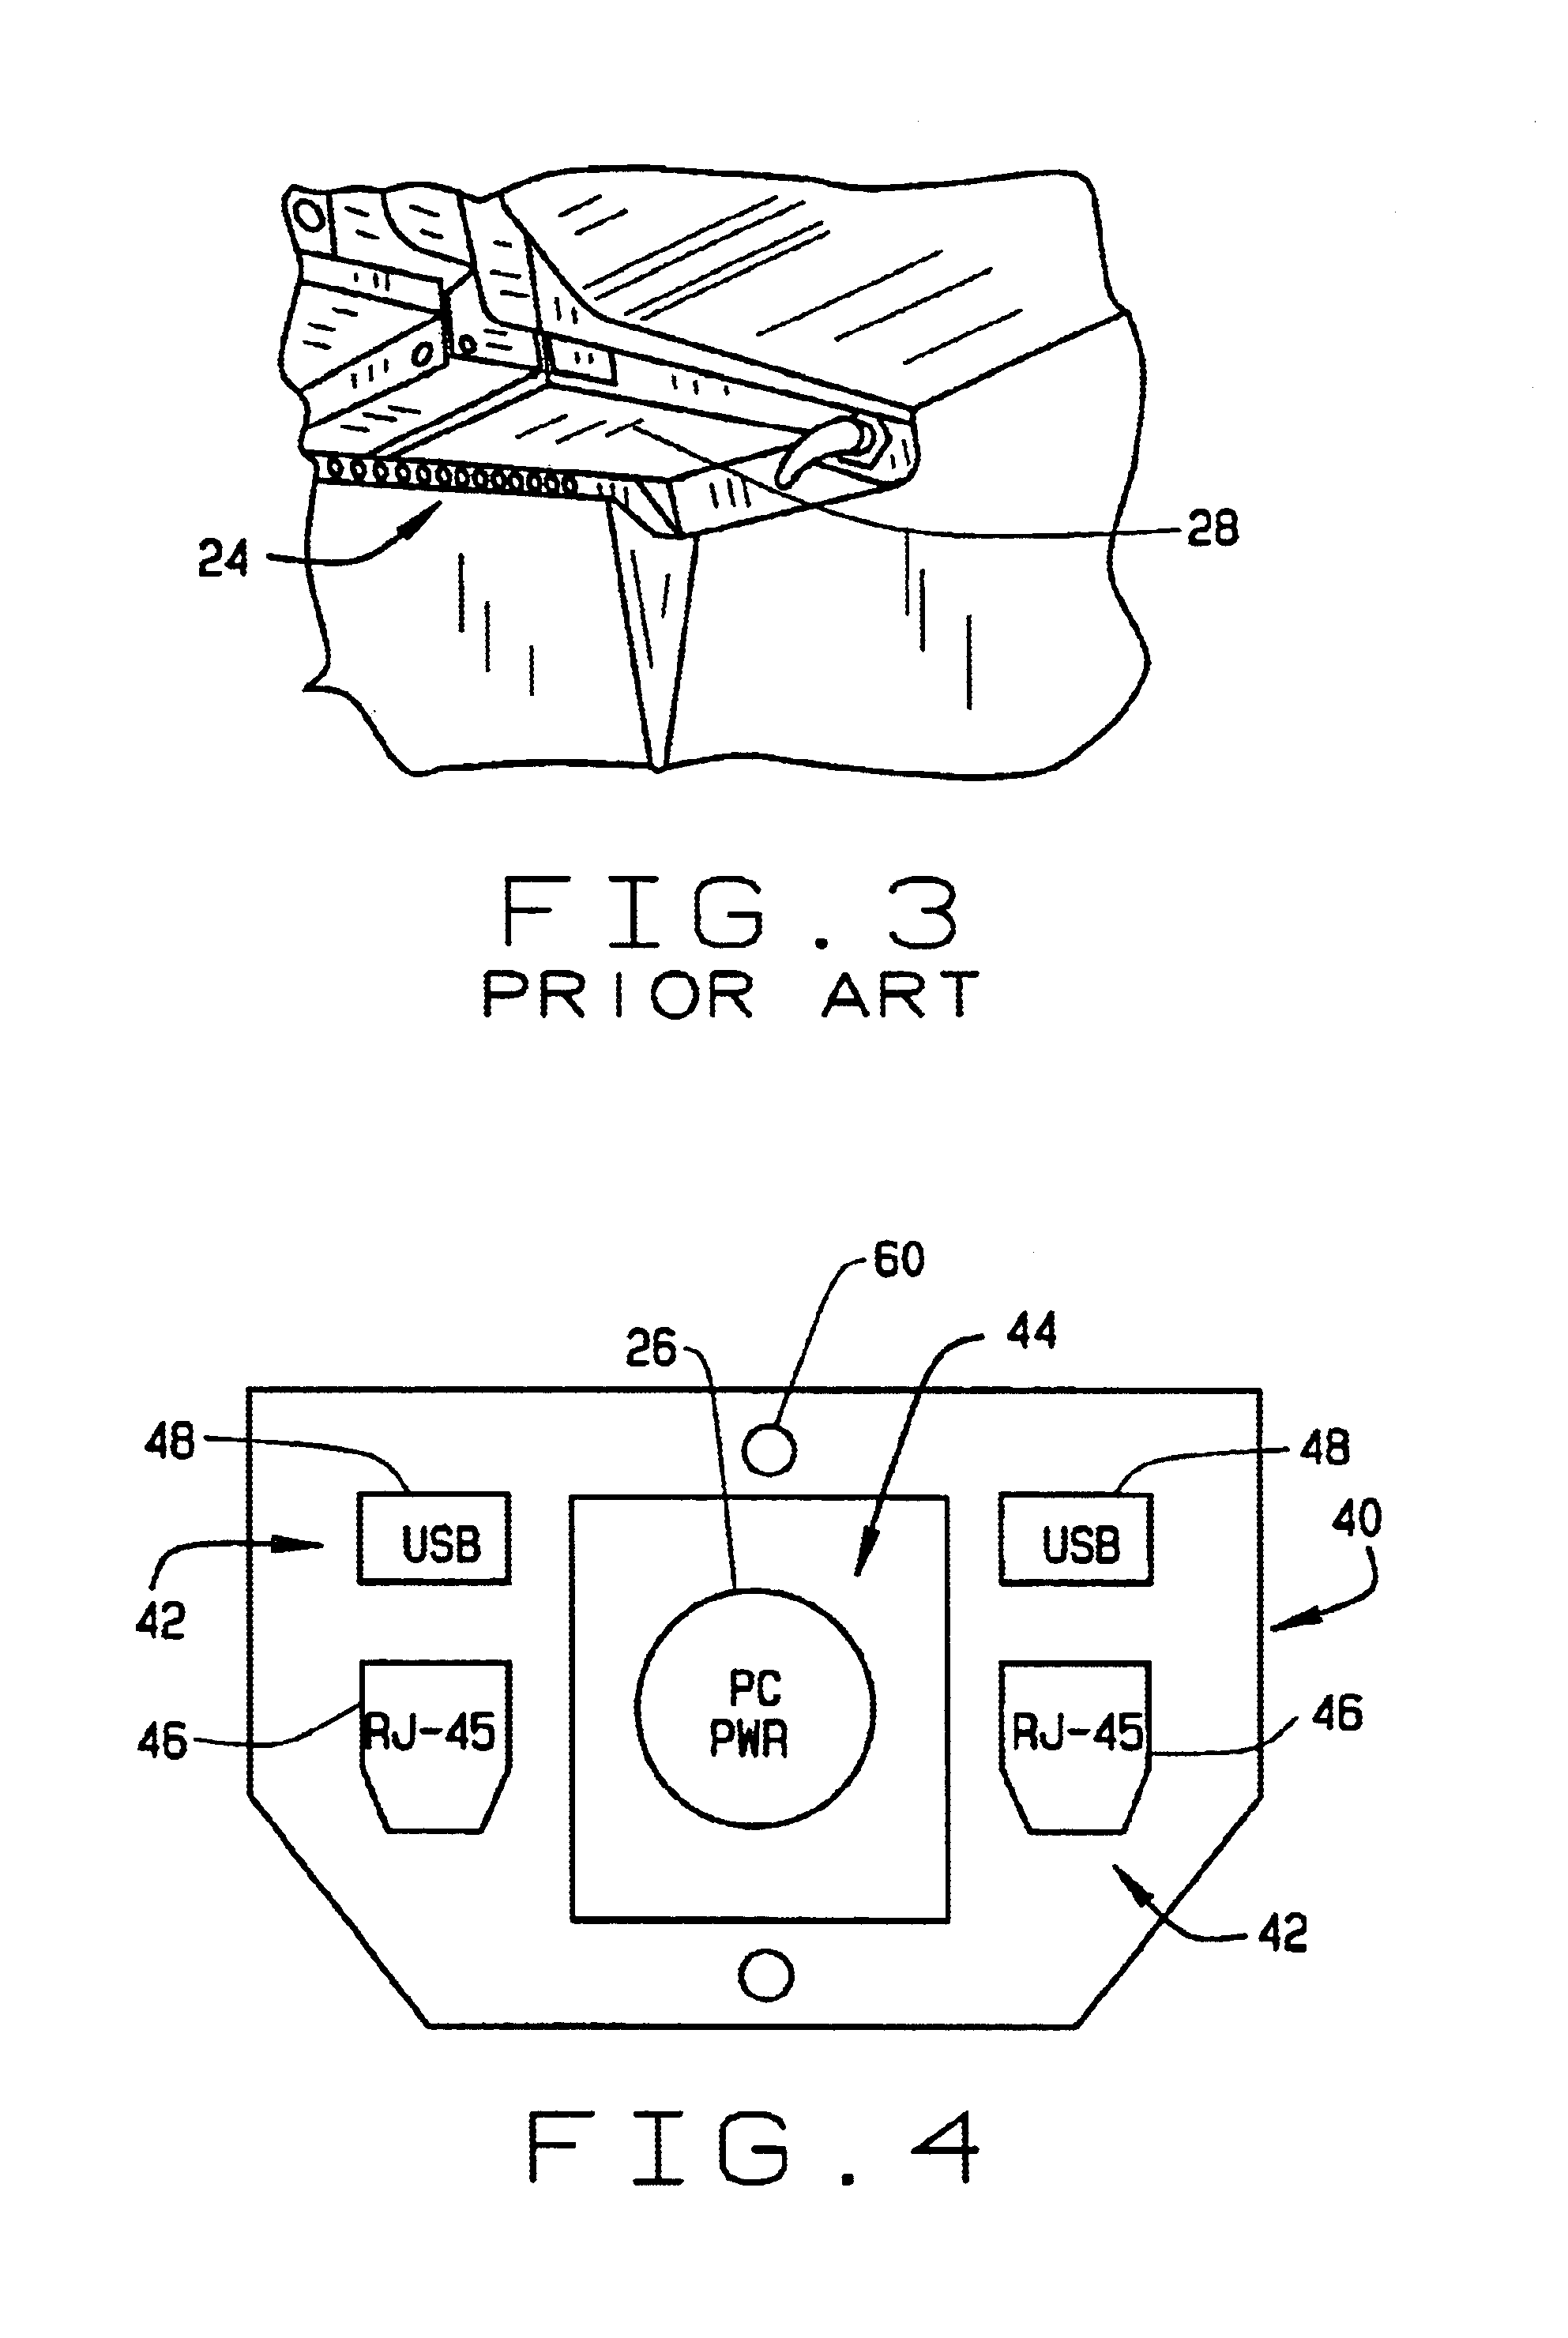 Replacement cover having integrated data ports for power port assembly on commercial aircraft